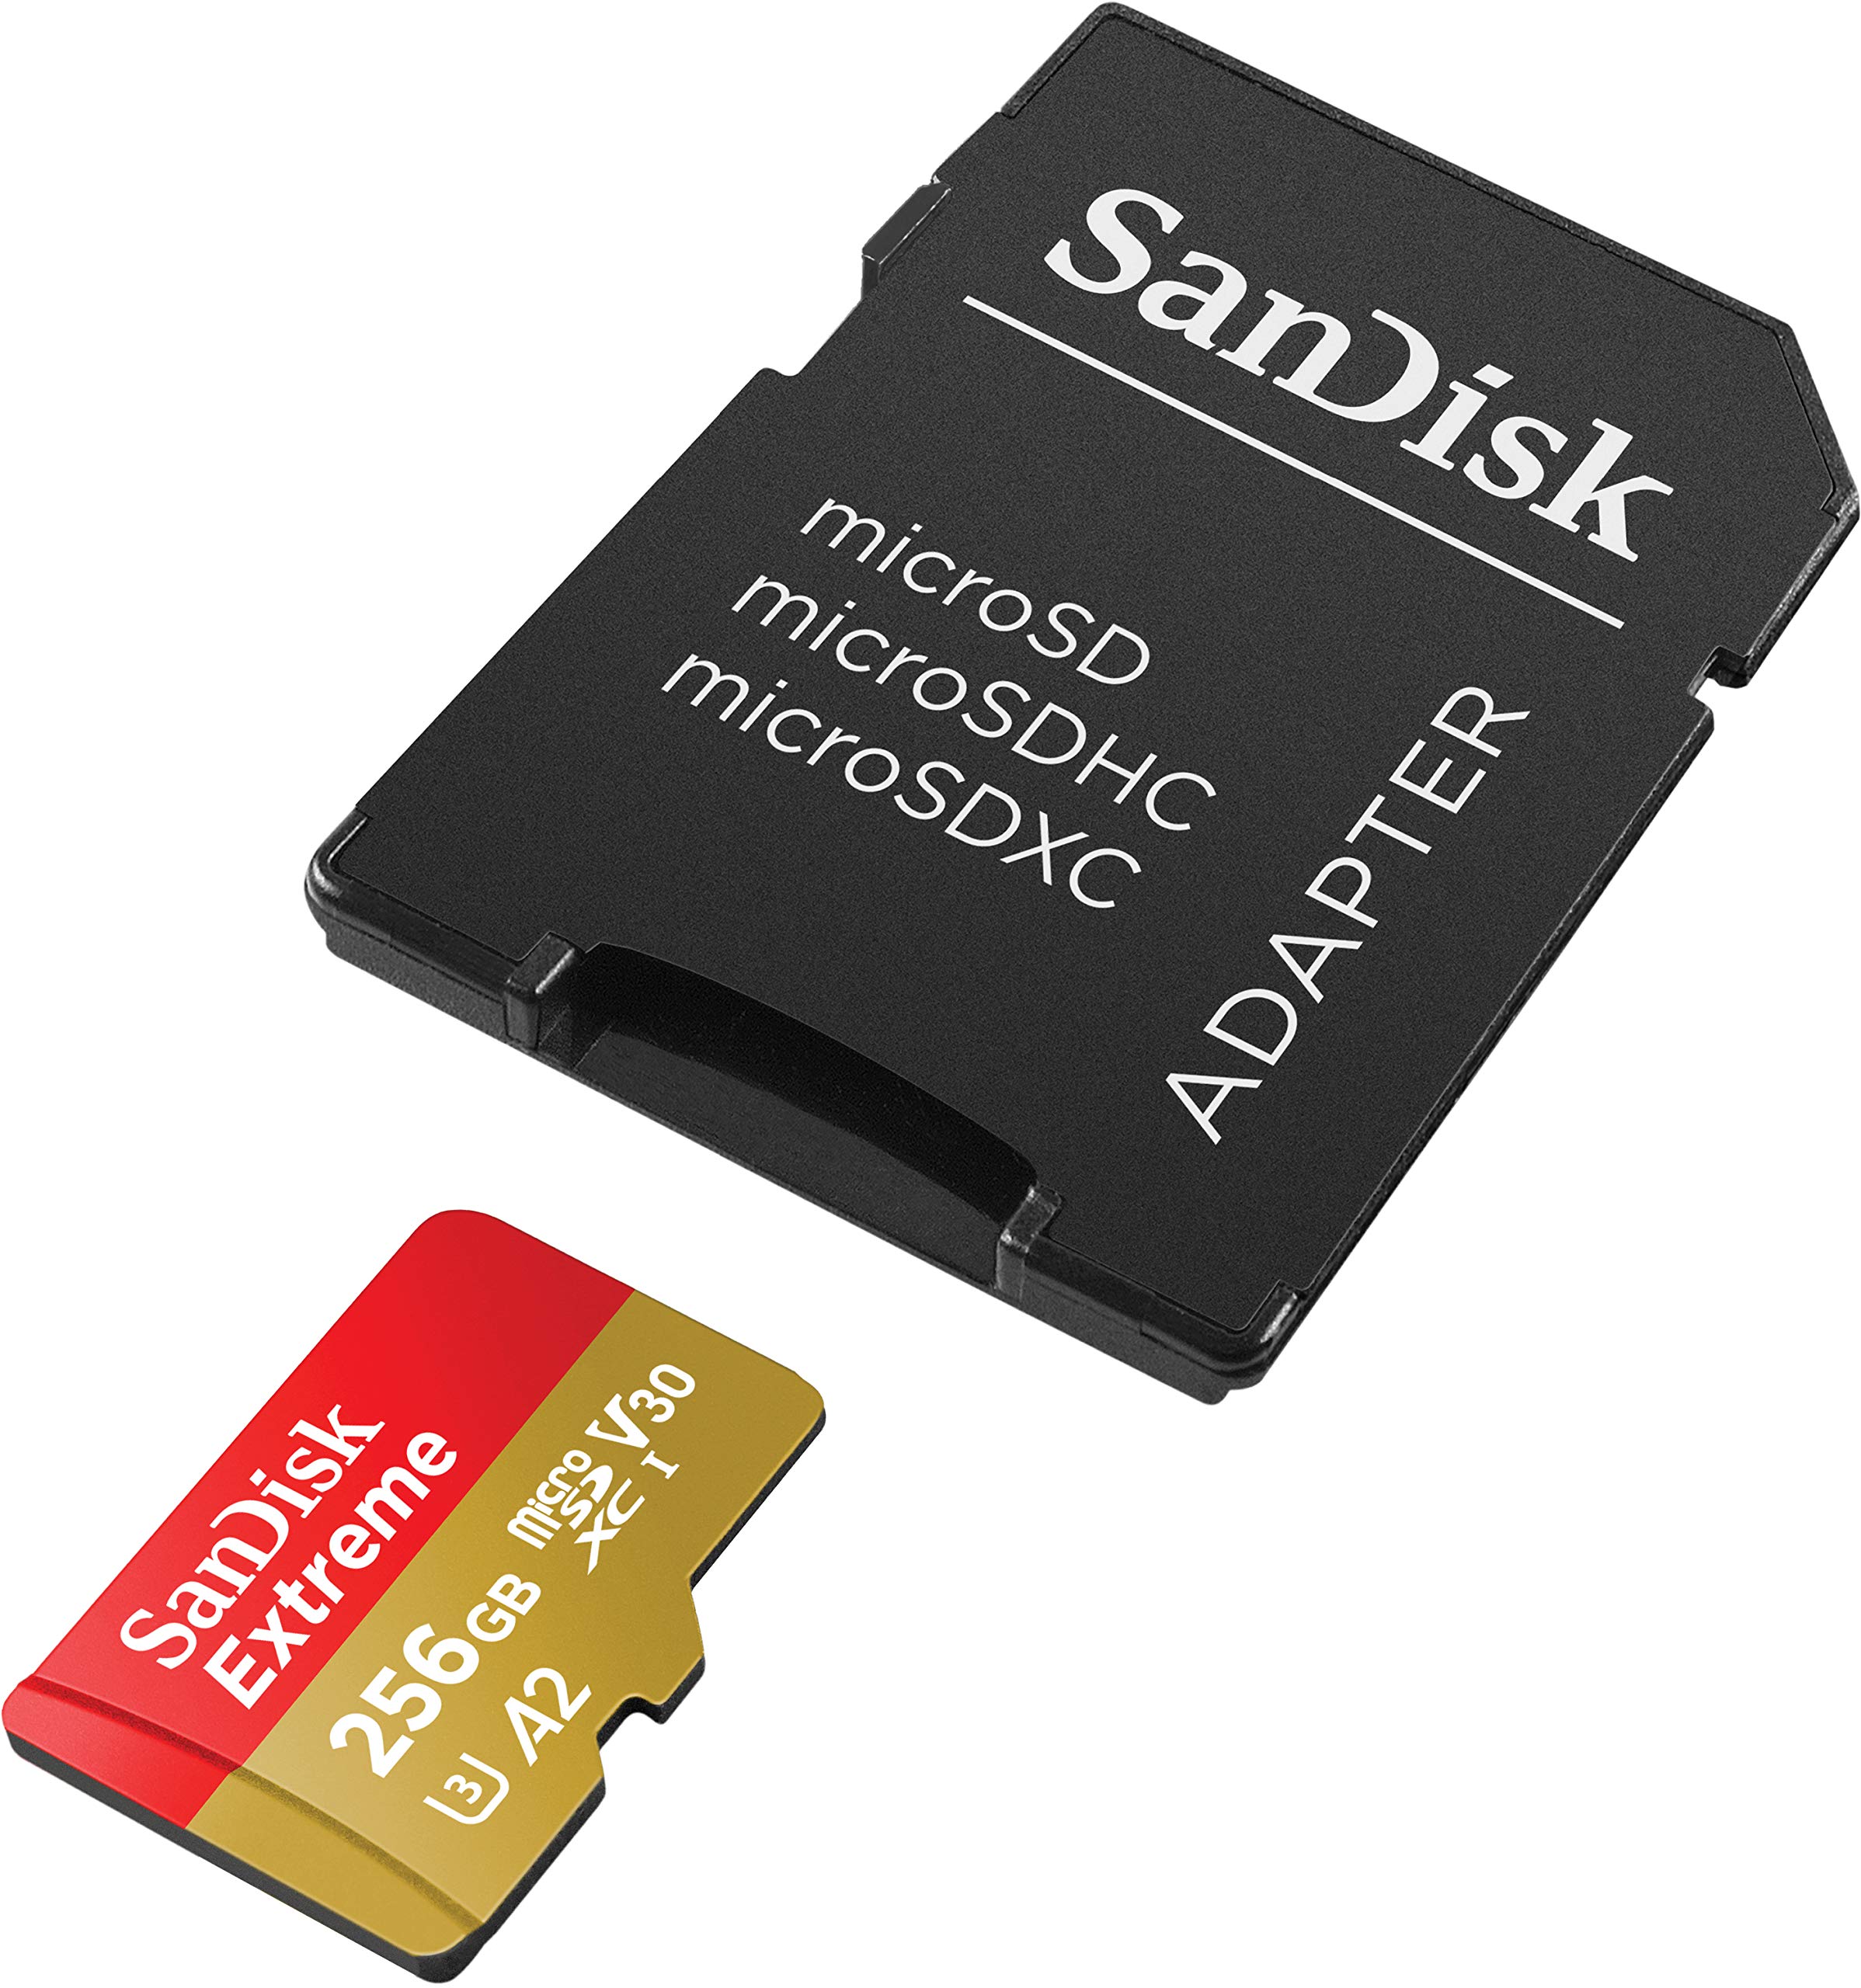 SanDisk 256GB Extreme microSDXC UHS-I Memory Card with Adapter - 160MB/s, U3, V30, 4K UHD, A2, Micro SD Card - SDSQXA1-256G-GN6MA - image 2 of 6